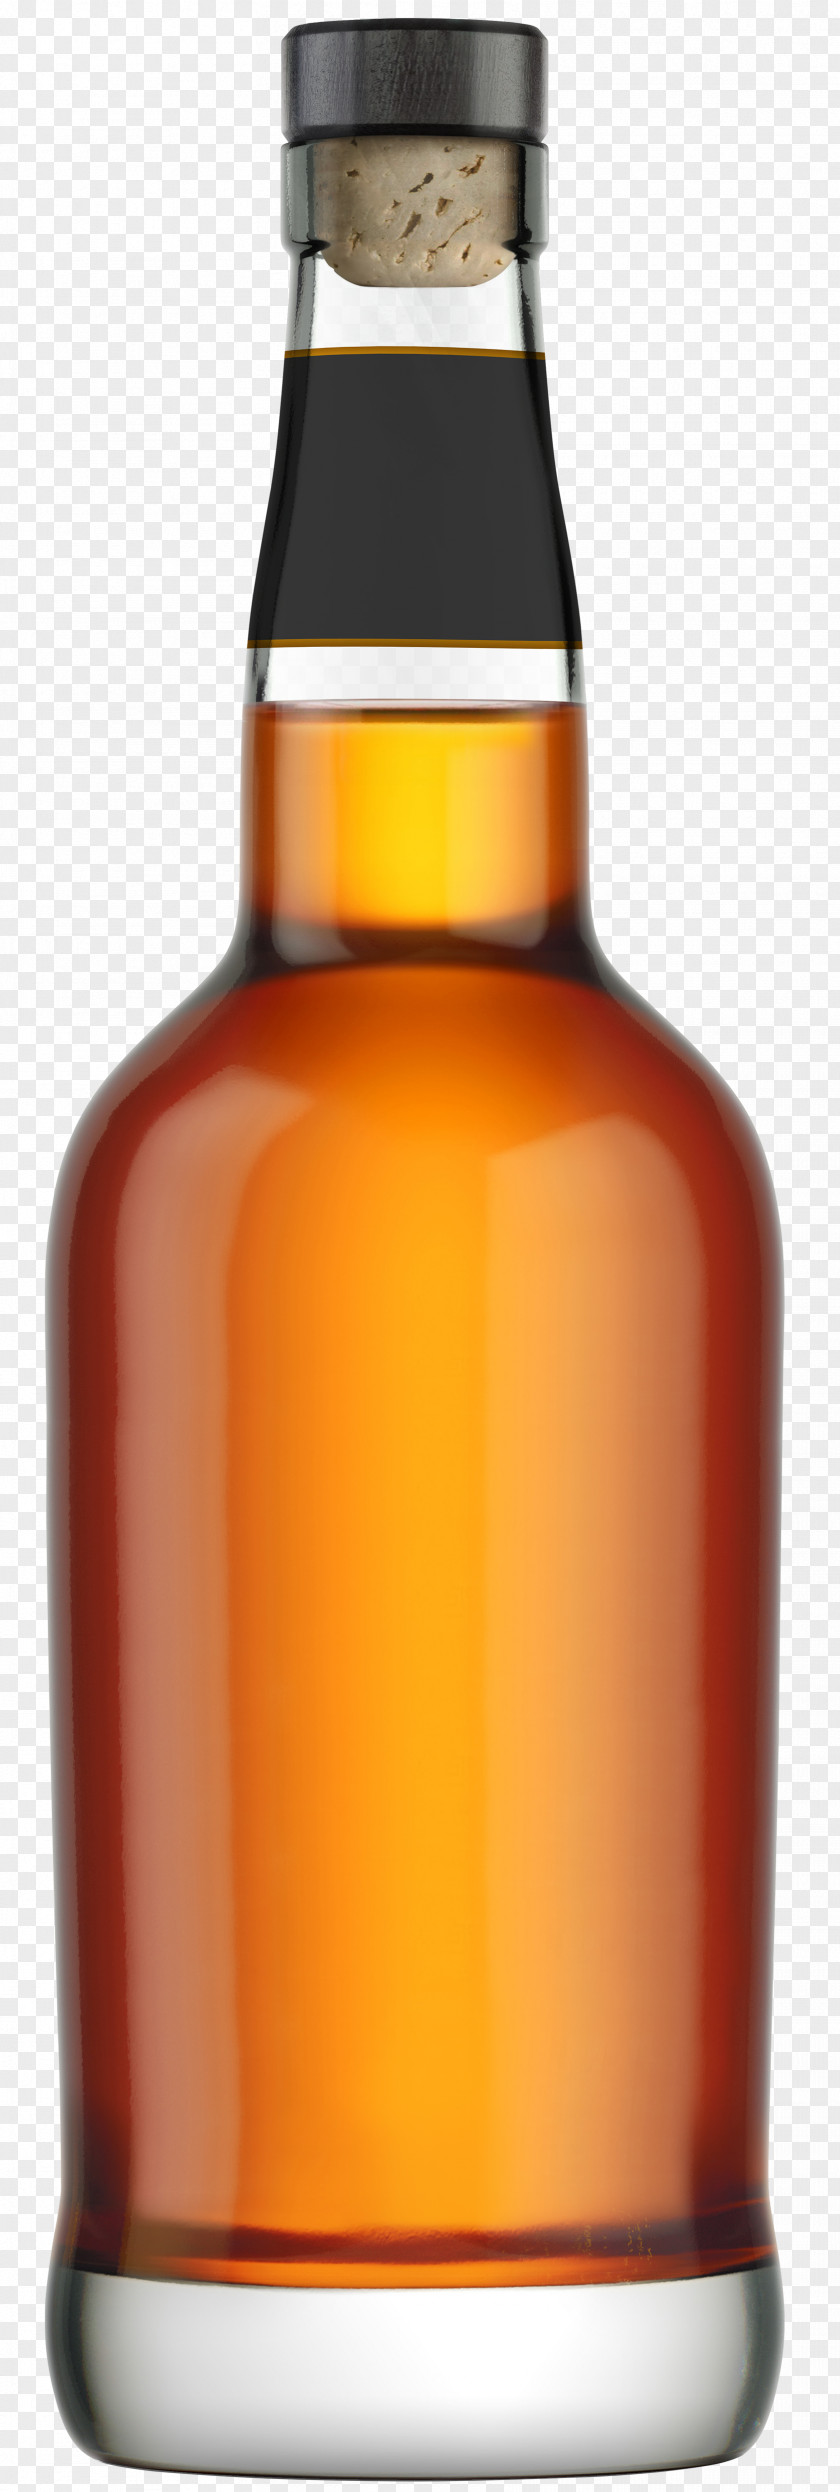 Bottle Bourbon Whiskey Prohibition In The United States Liquor Scotch Whisky PNG